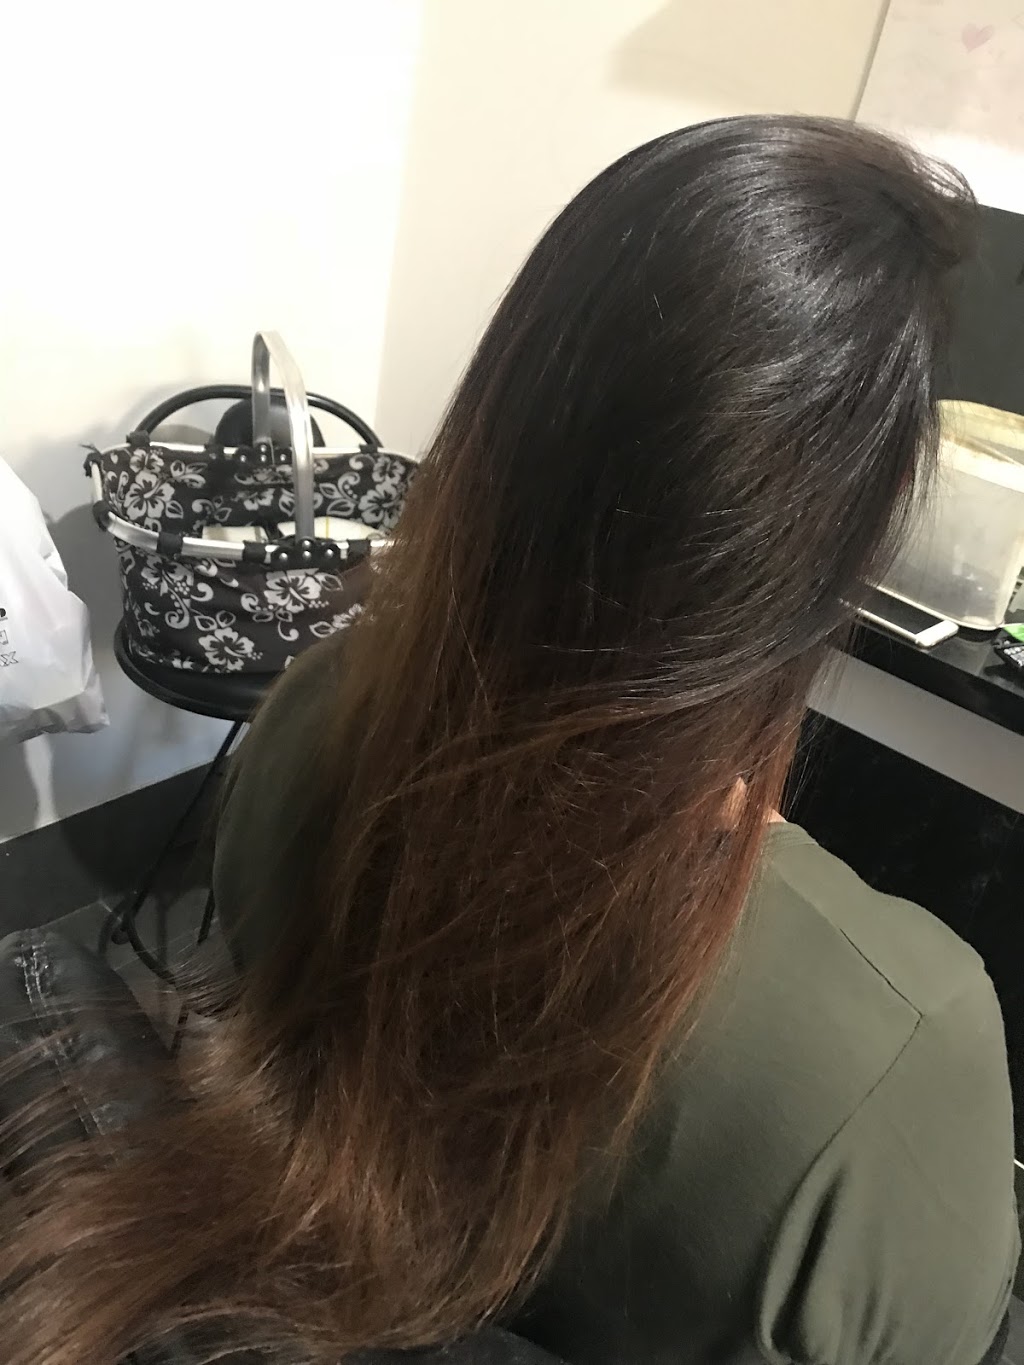 Rene’s half price mobile hair services | hair care | Westfield Rd, Seville Grove WA 6112, Australia | 0433576577 OR +61 433 576 577